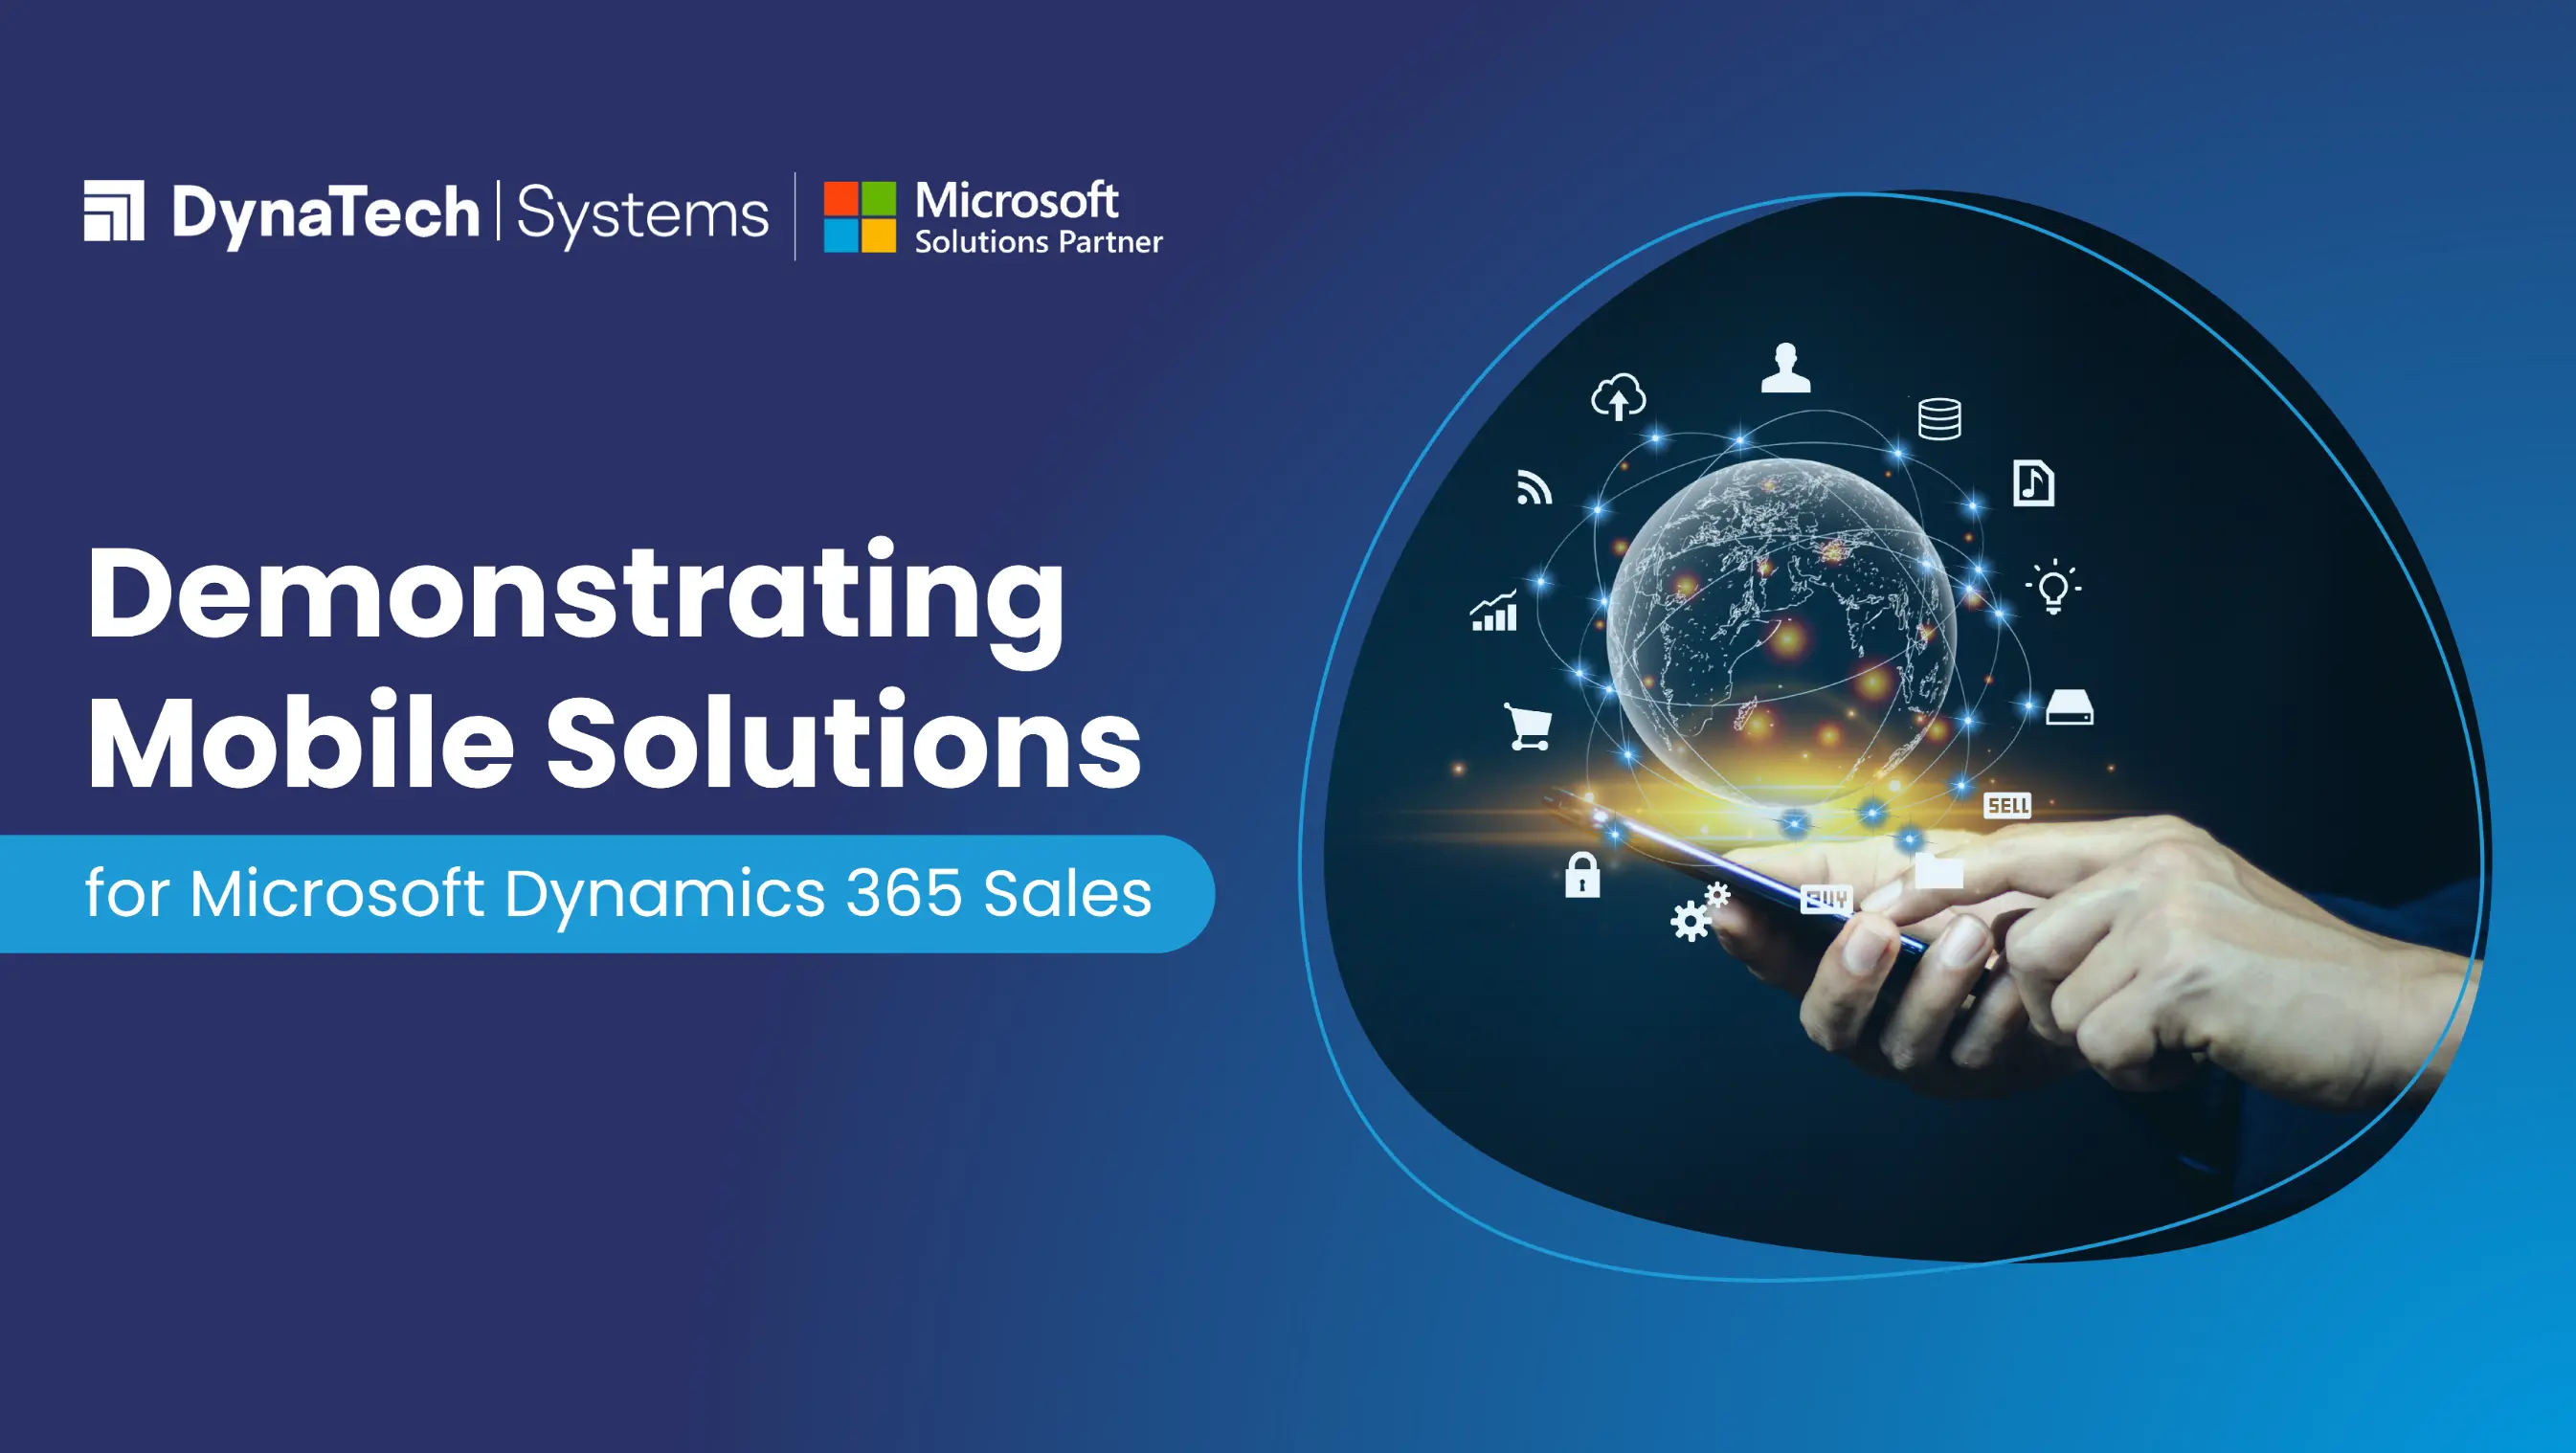 Demonstrating Mobile Solutions for Microsoft Dynamics 365 Sales (CRM App)